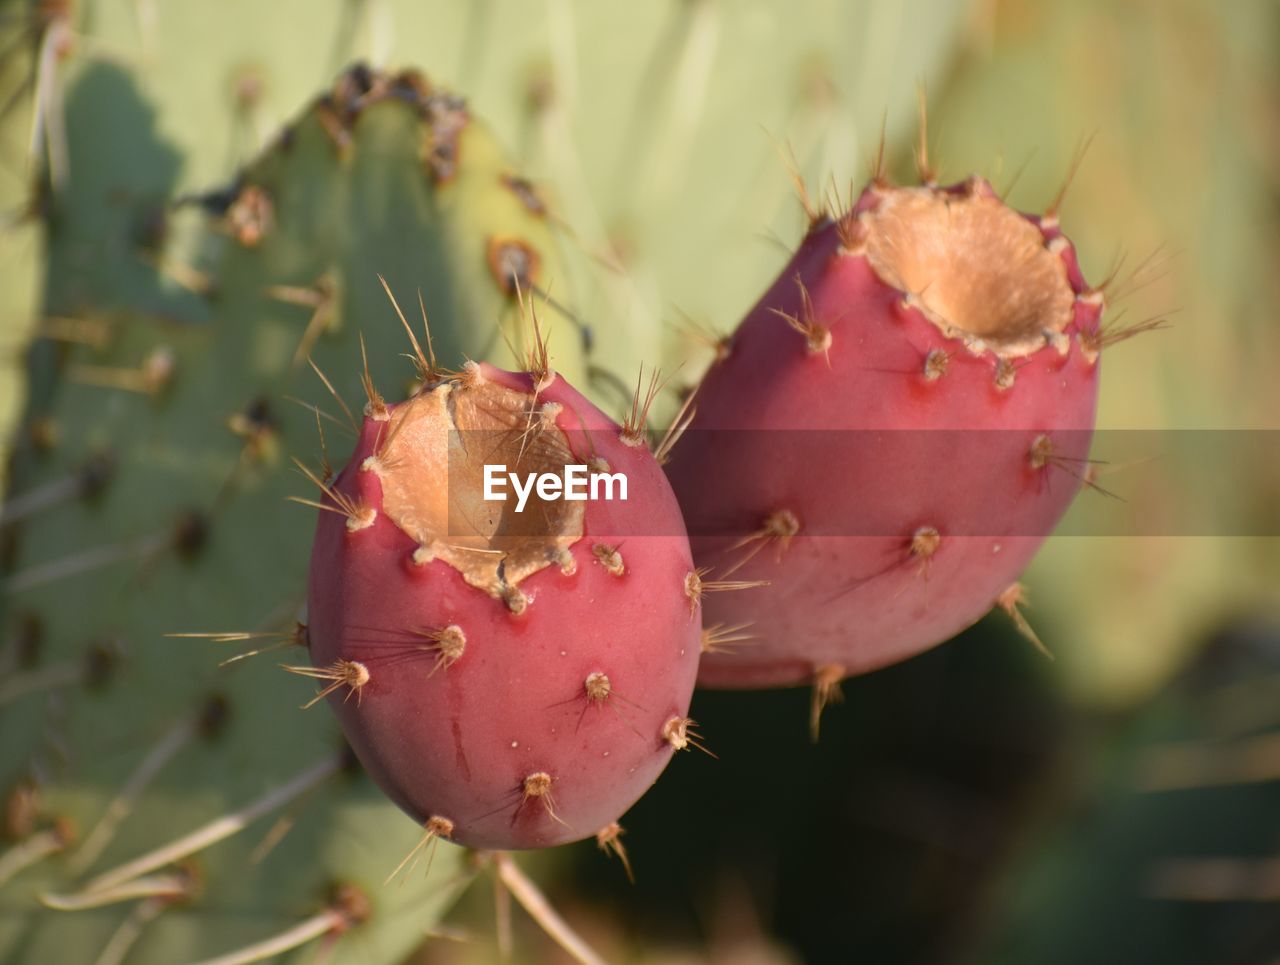 CLOSE-UP OF CACTUS GROWING ON PLANT